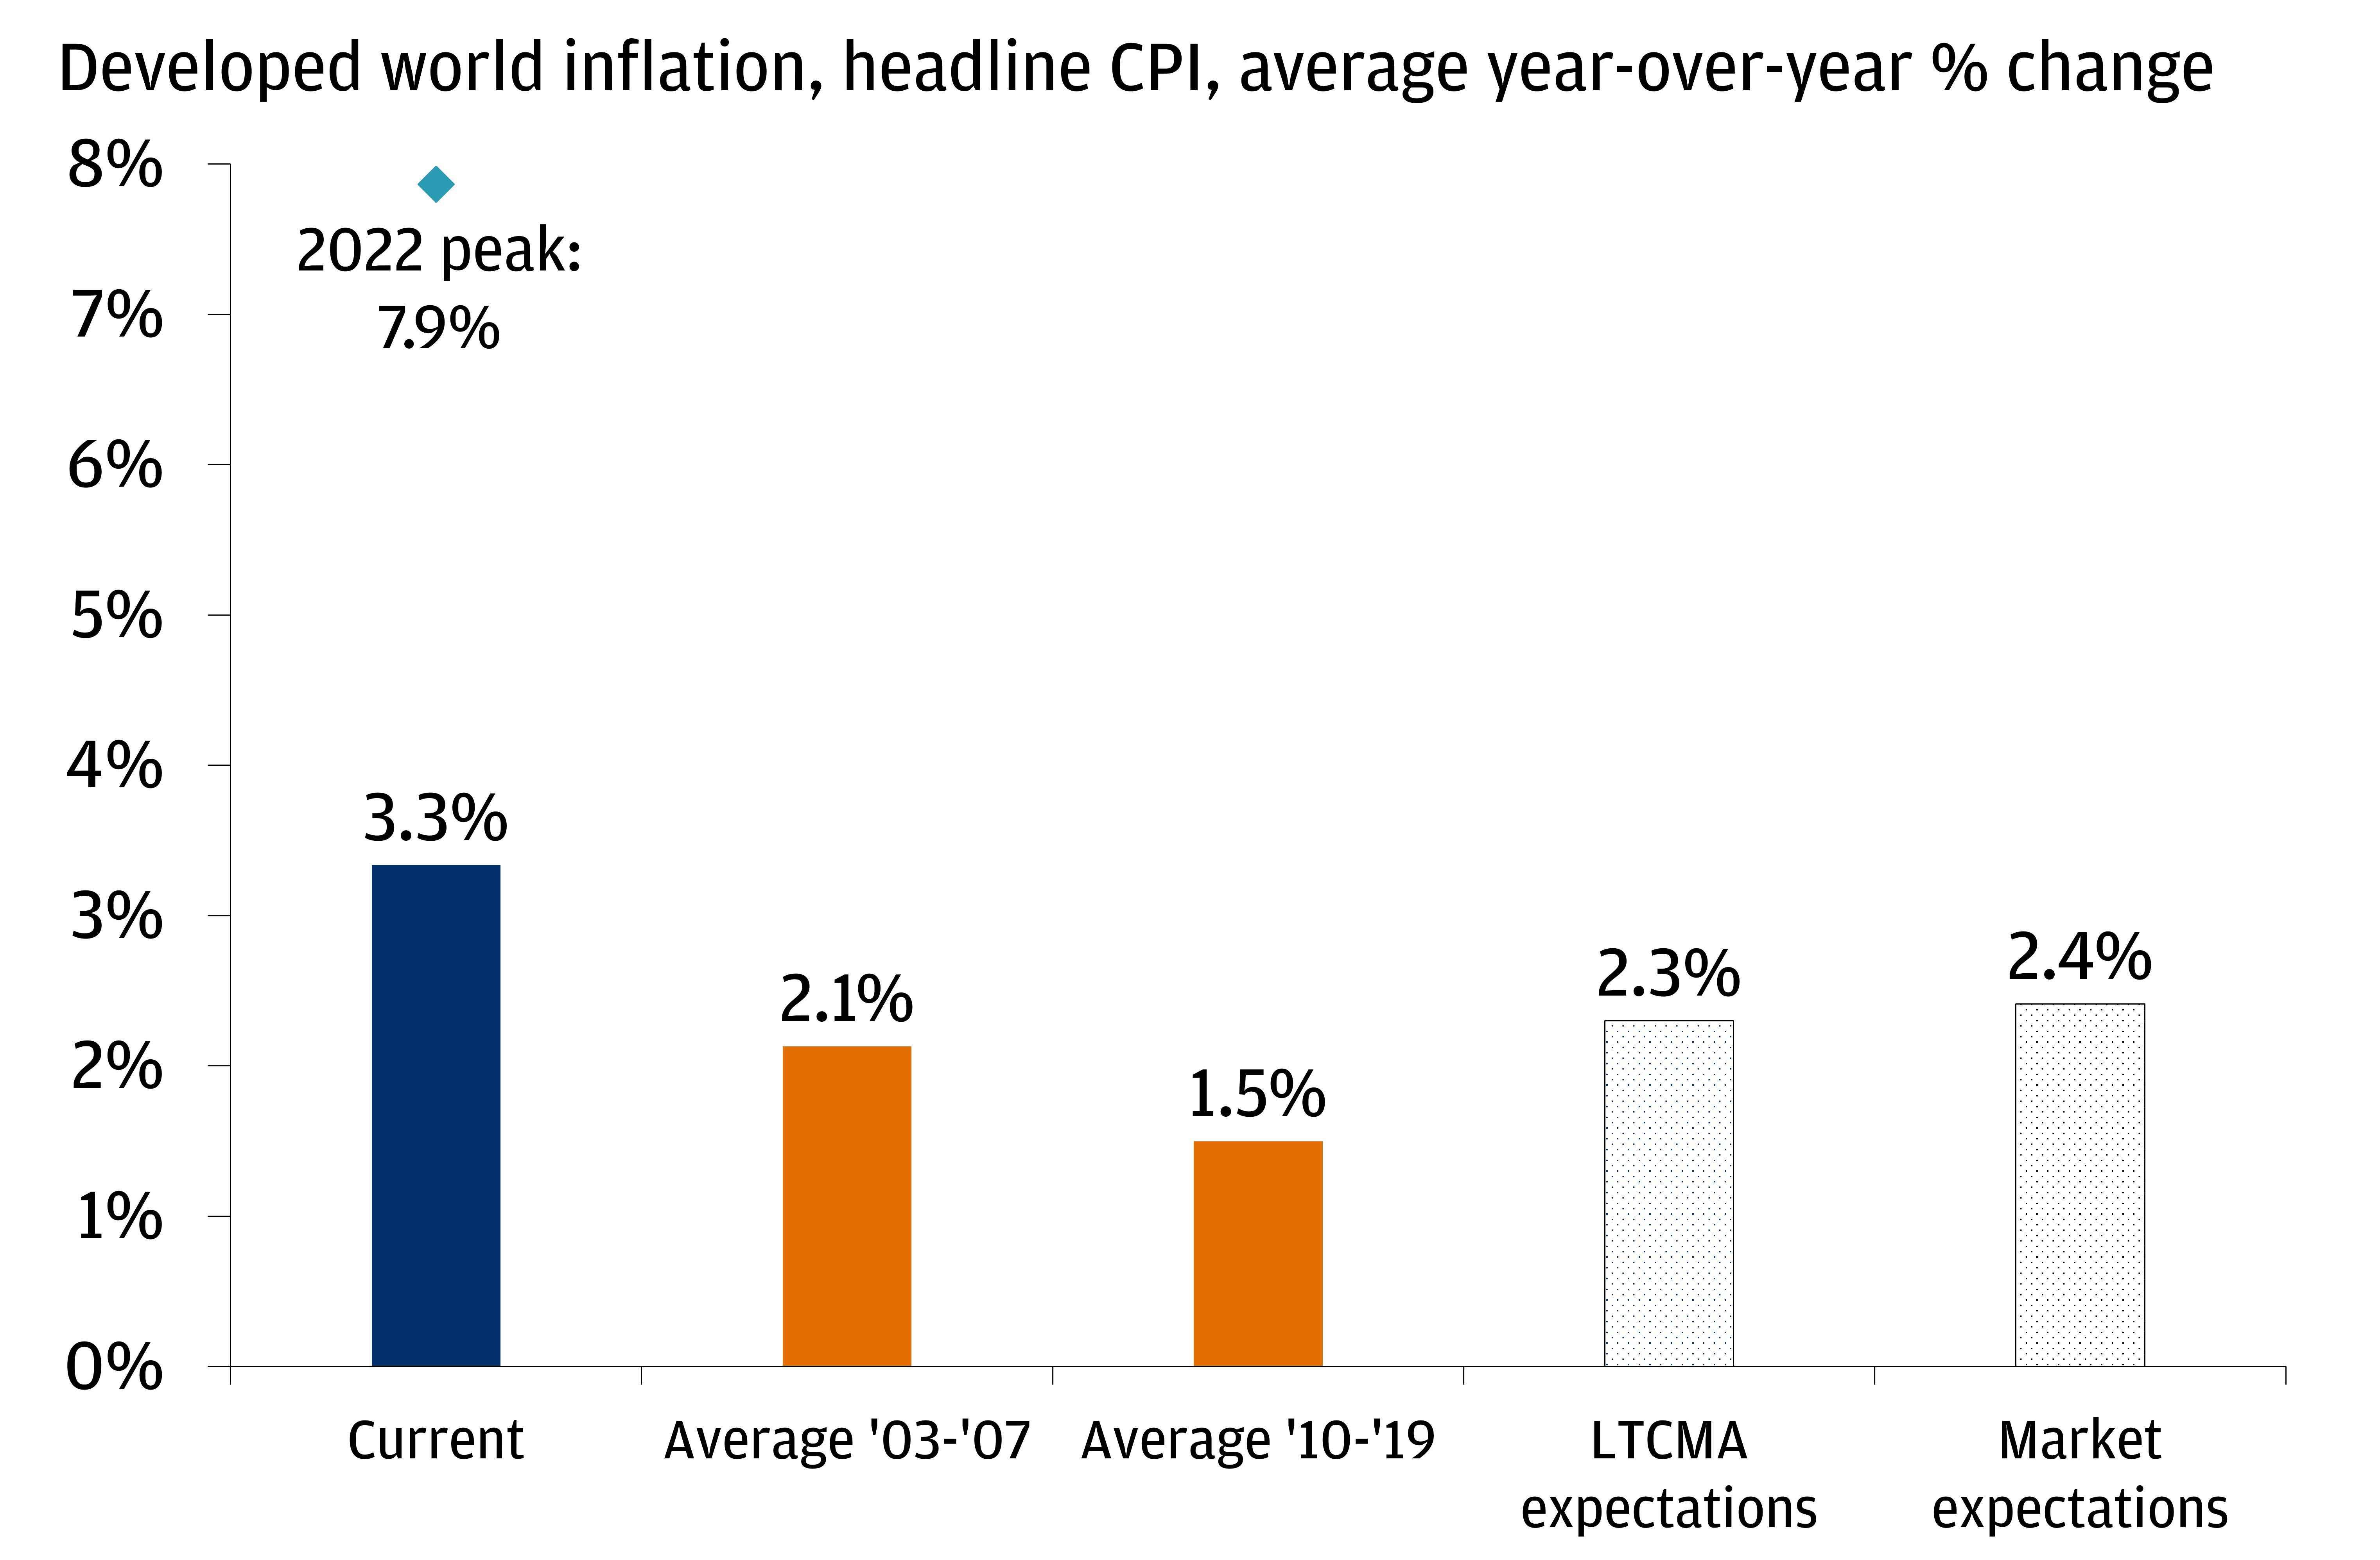 This column chart shows YoY percentage average CPI in the developed world.